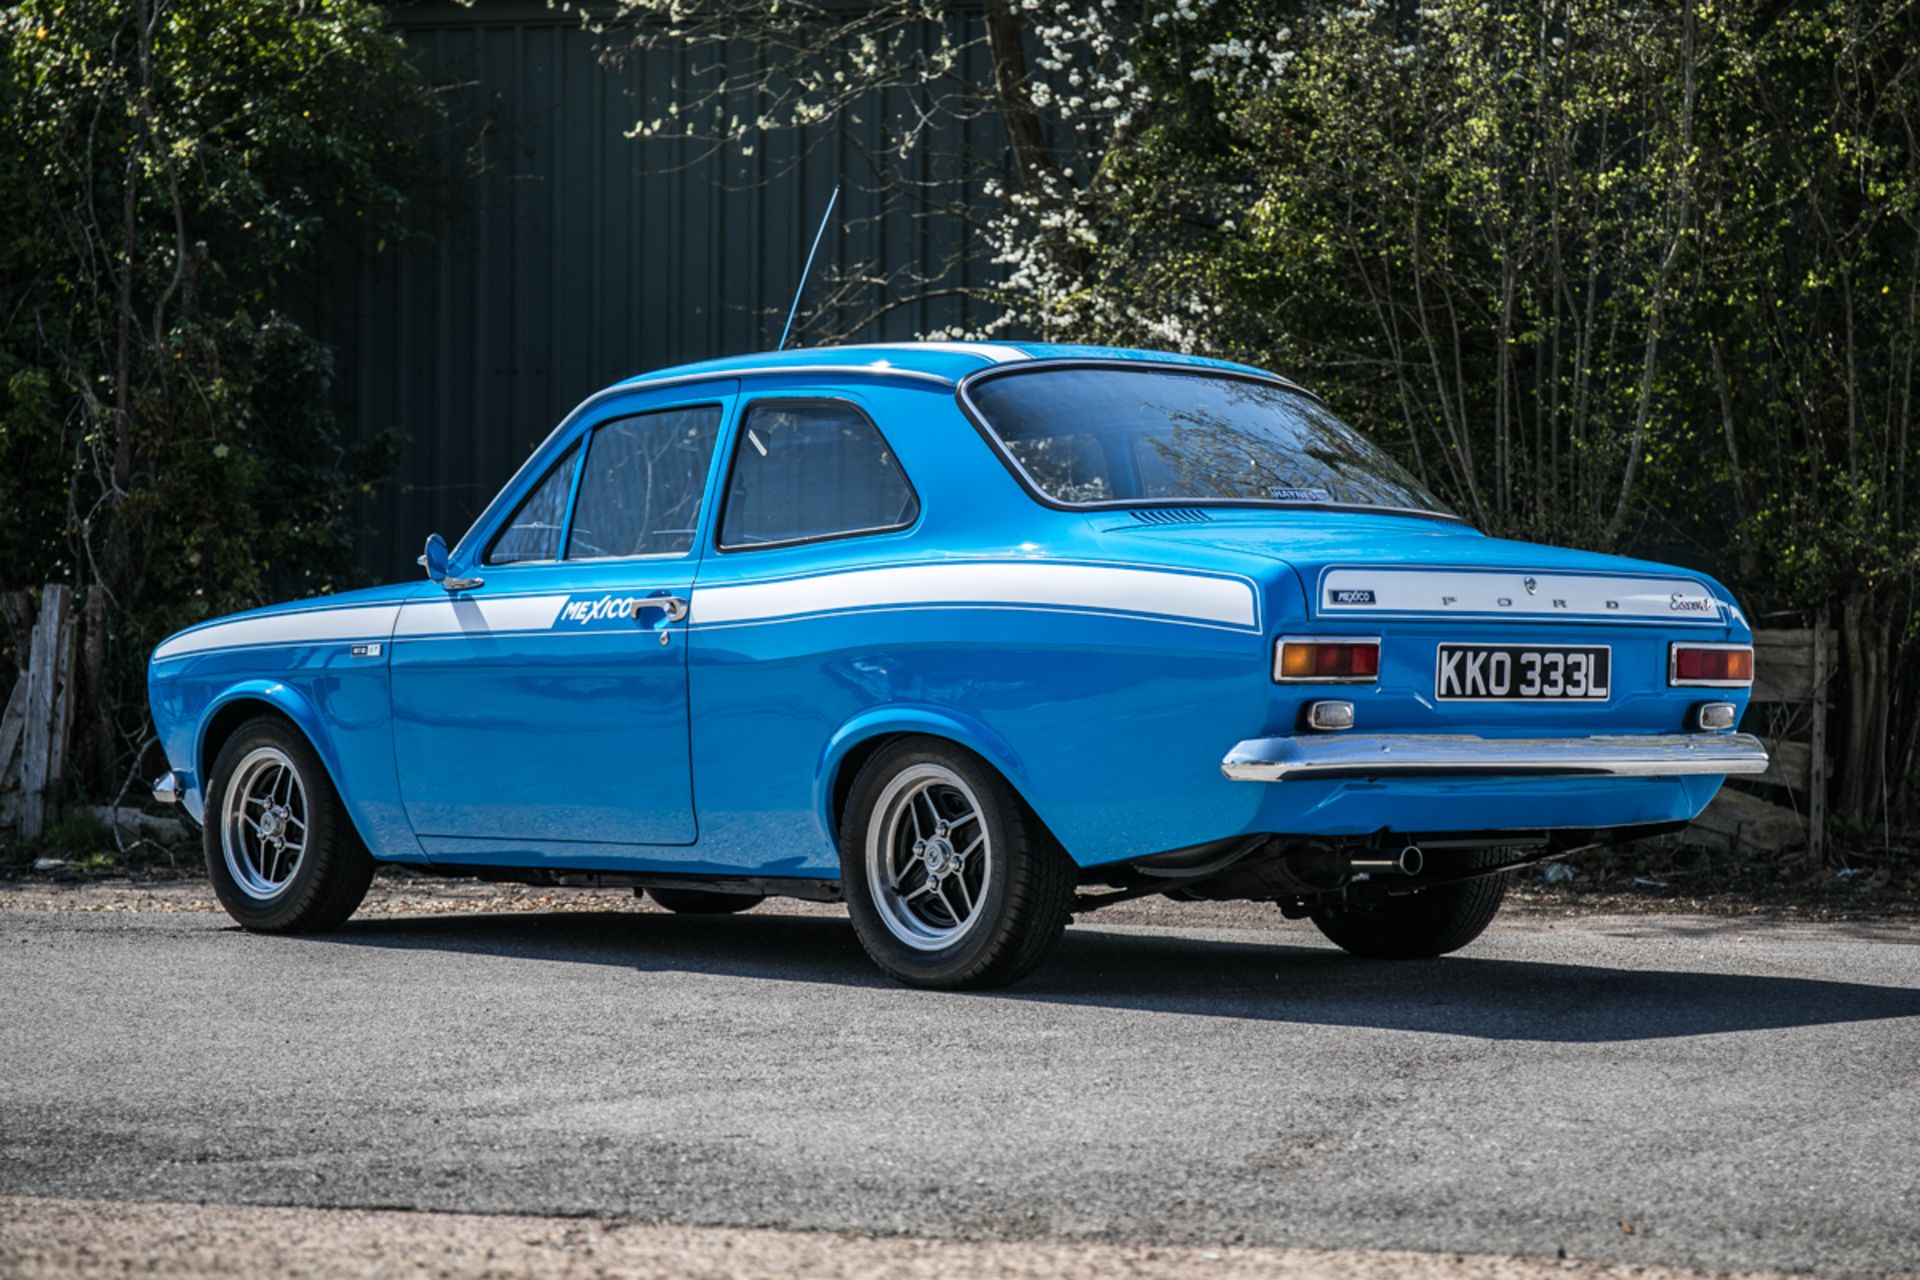 1973 Ford Escort 1600 Mexico - Image 4 of 20